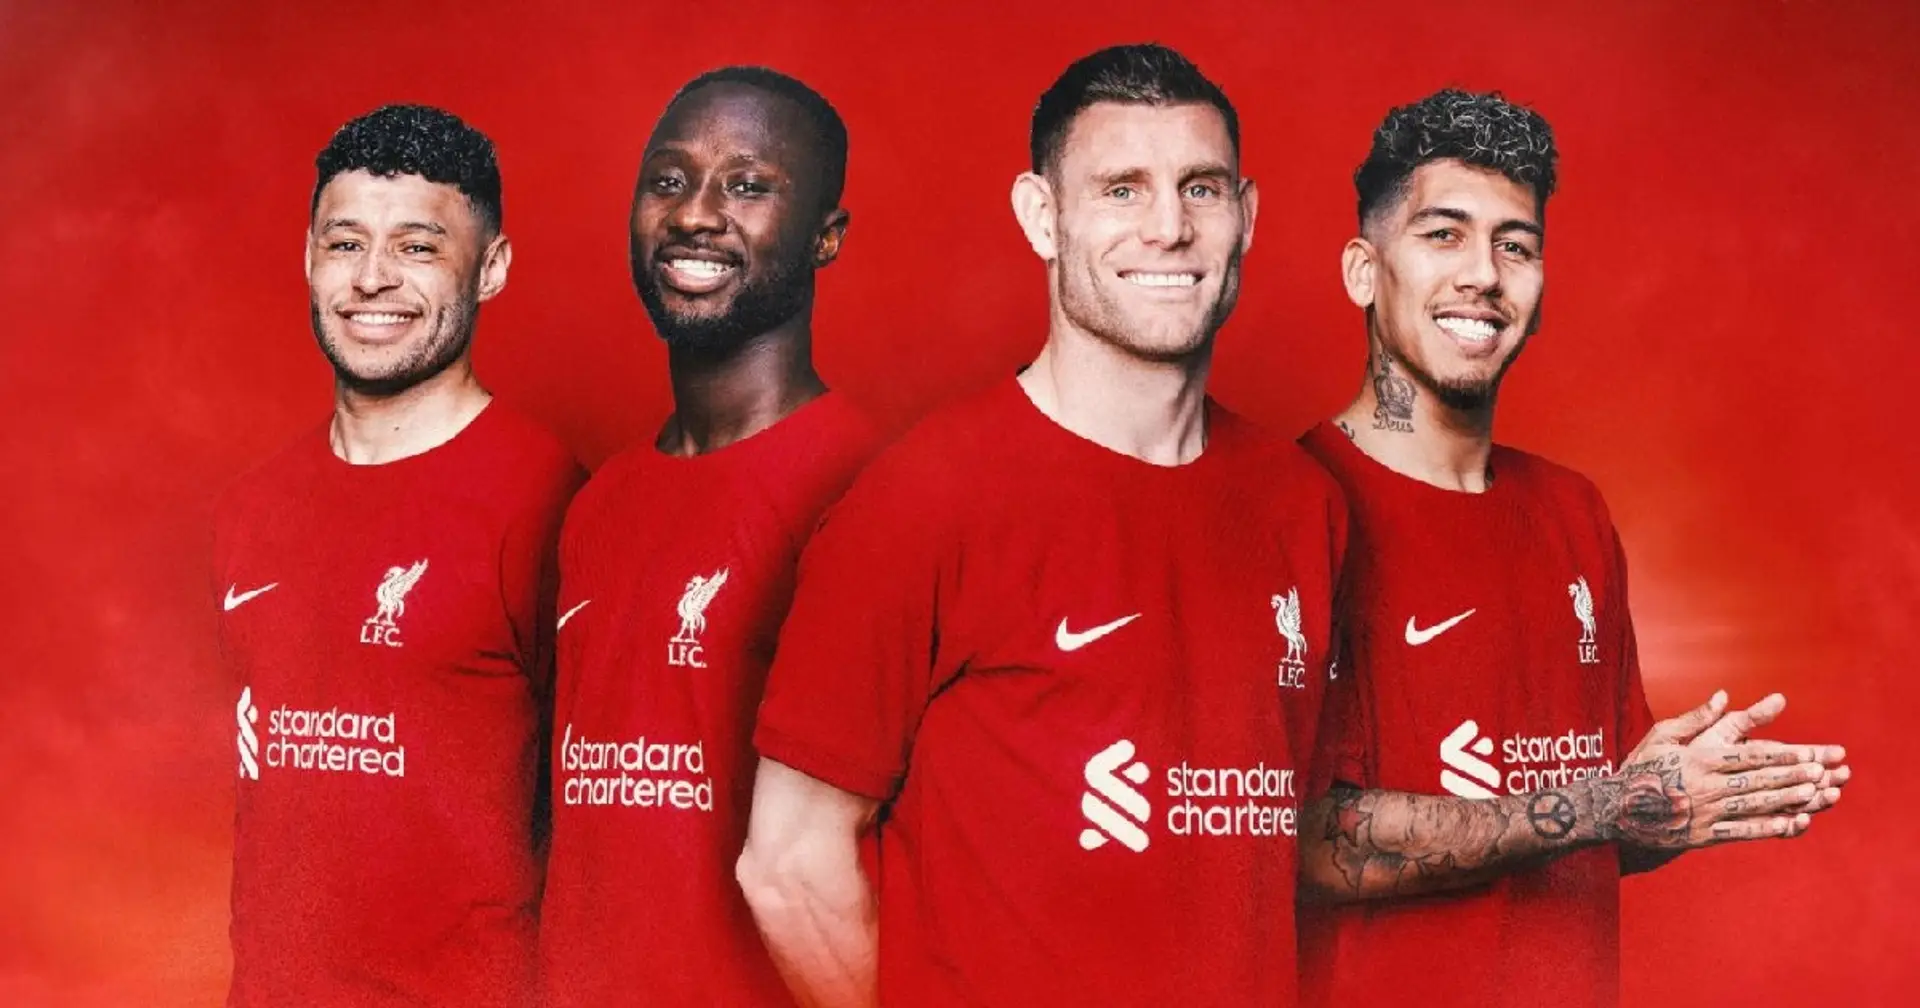 OFFICIAL: Liverpool confirm exit of Milner, Firmino, Oxlade-Chamberlain and Keita